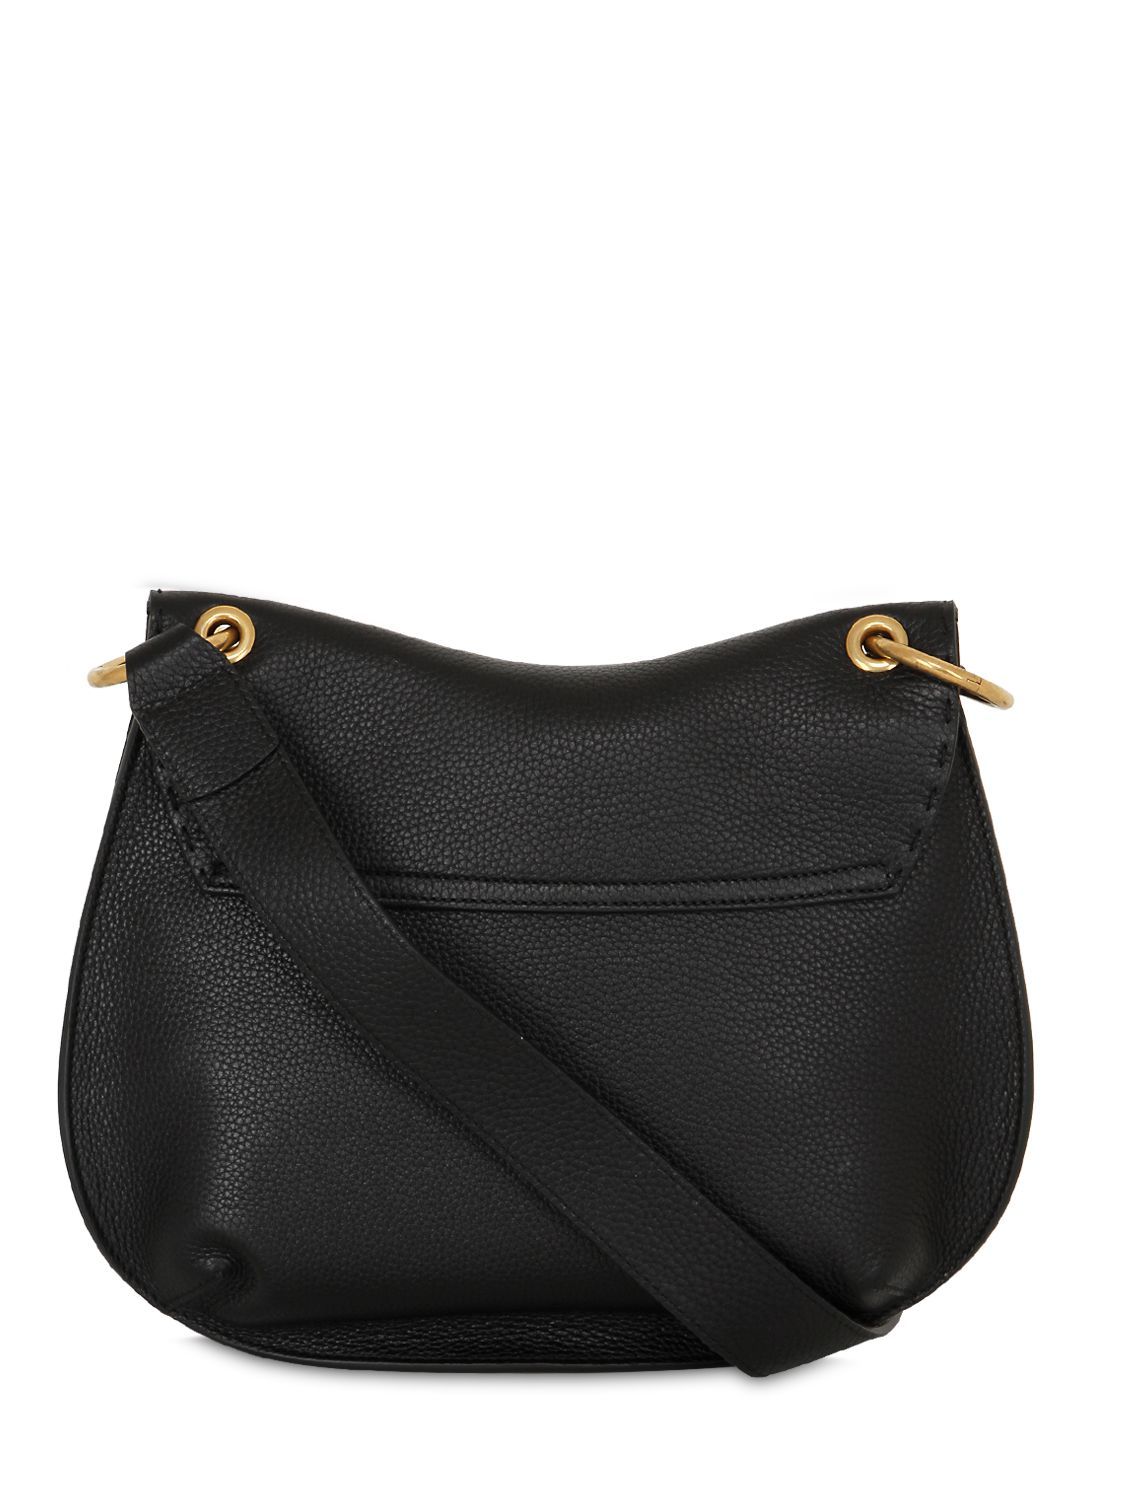 Gucci GG Marmont Leather Shoulder Bag in Black - Lyst